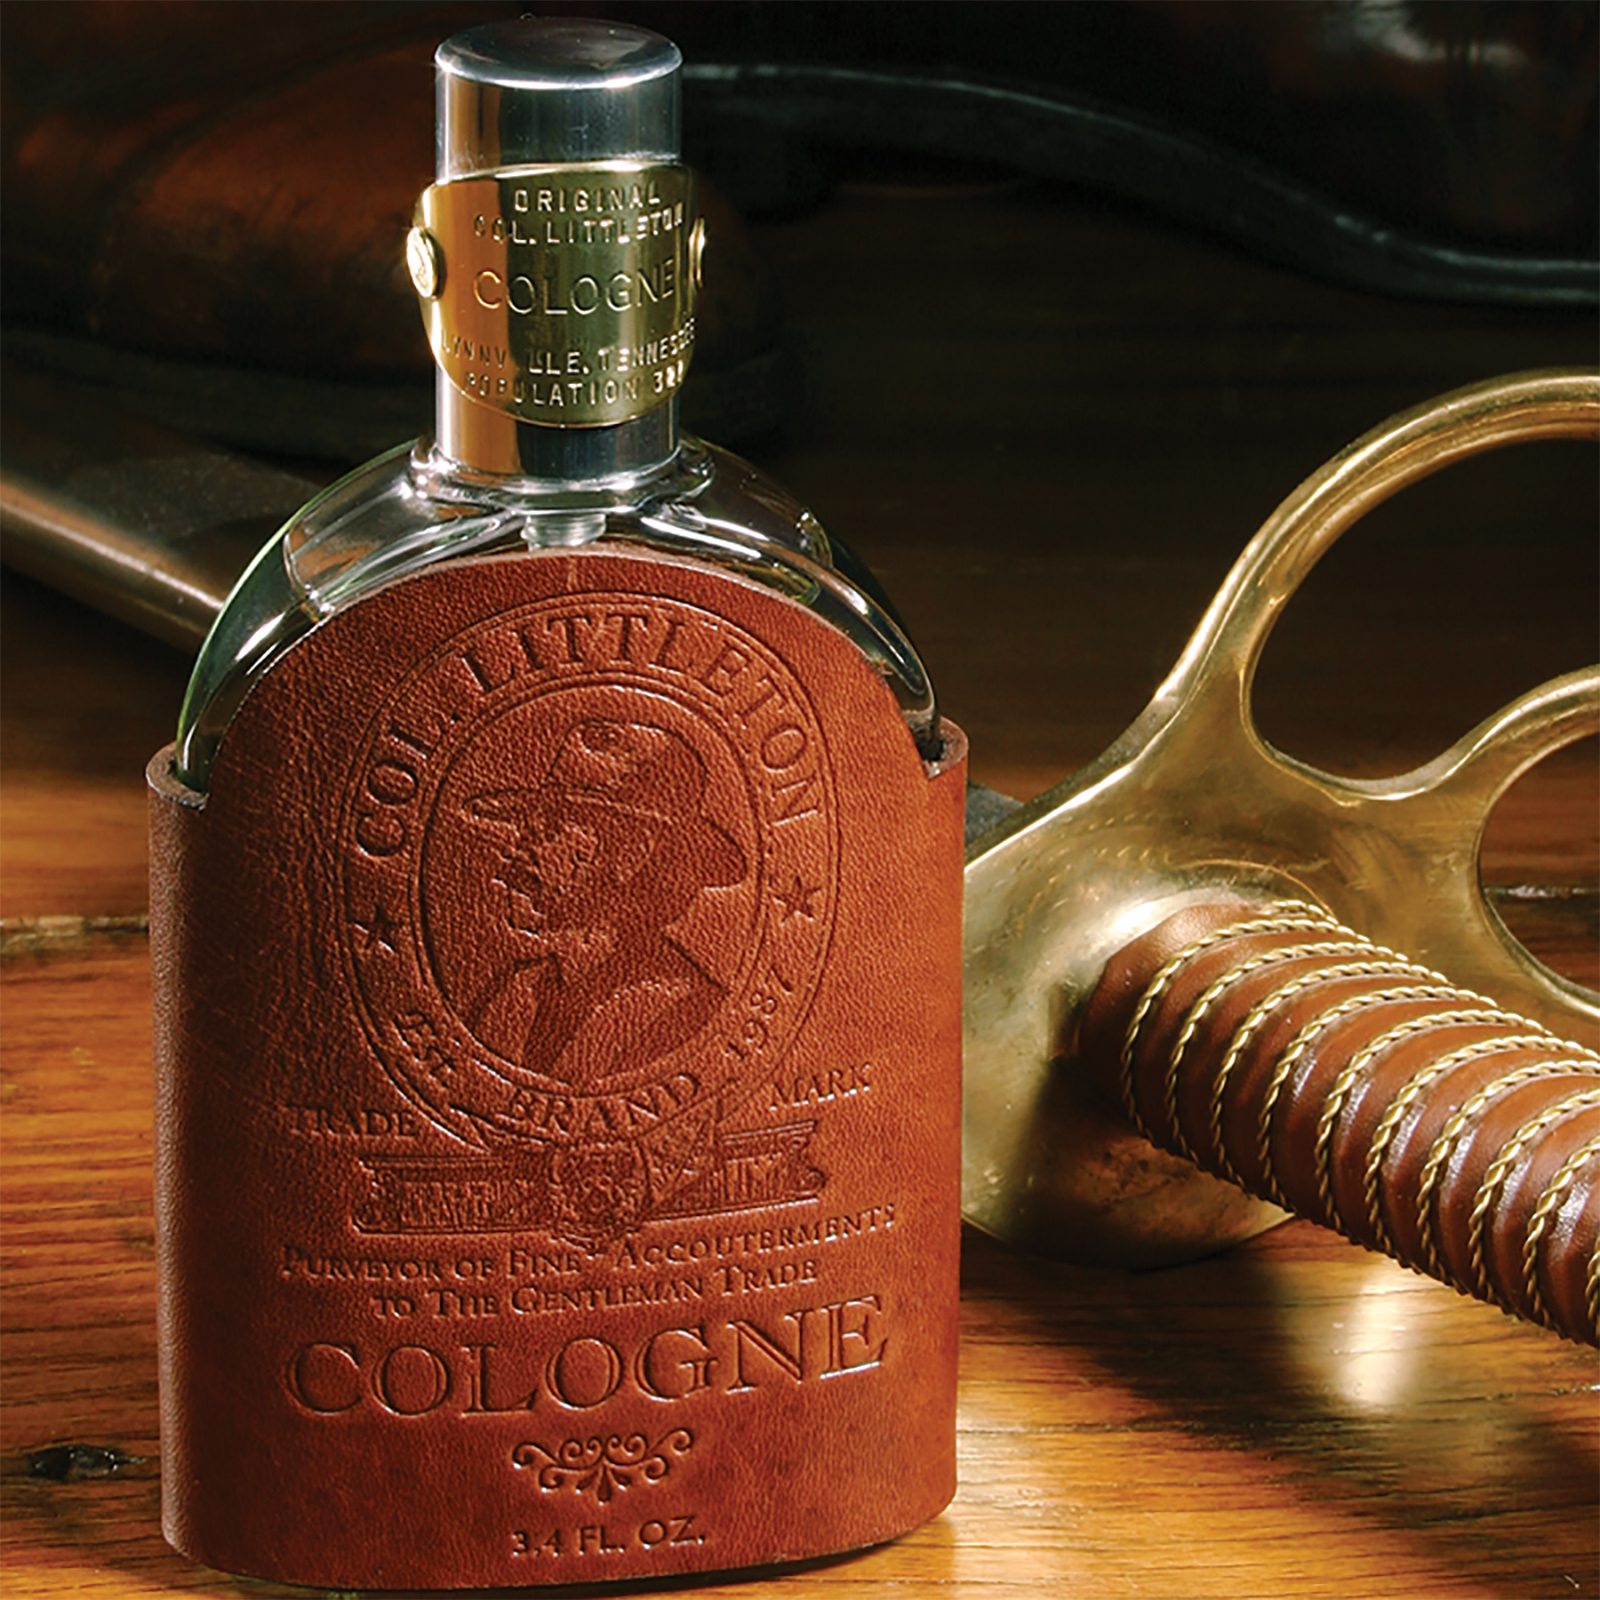 A bottle of Colonel Littleton cologne on a wooden table next to the hilt of an antique saber.